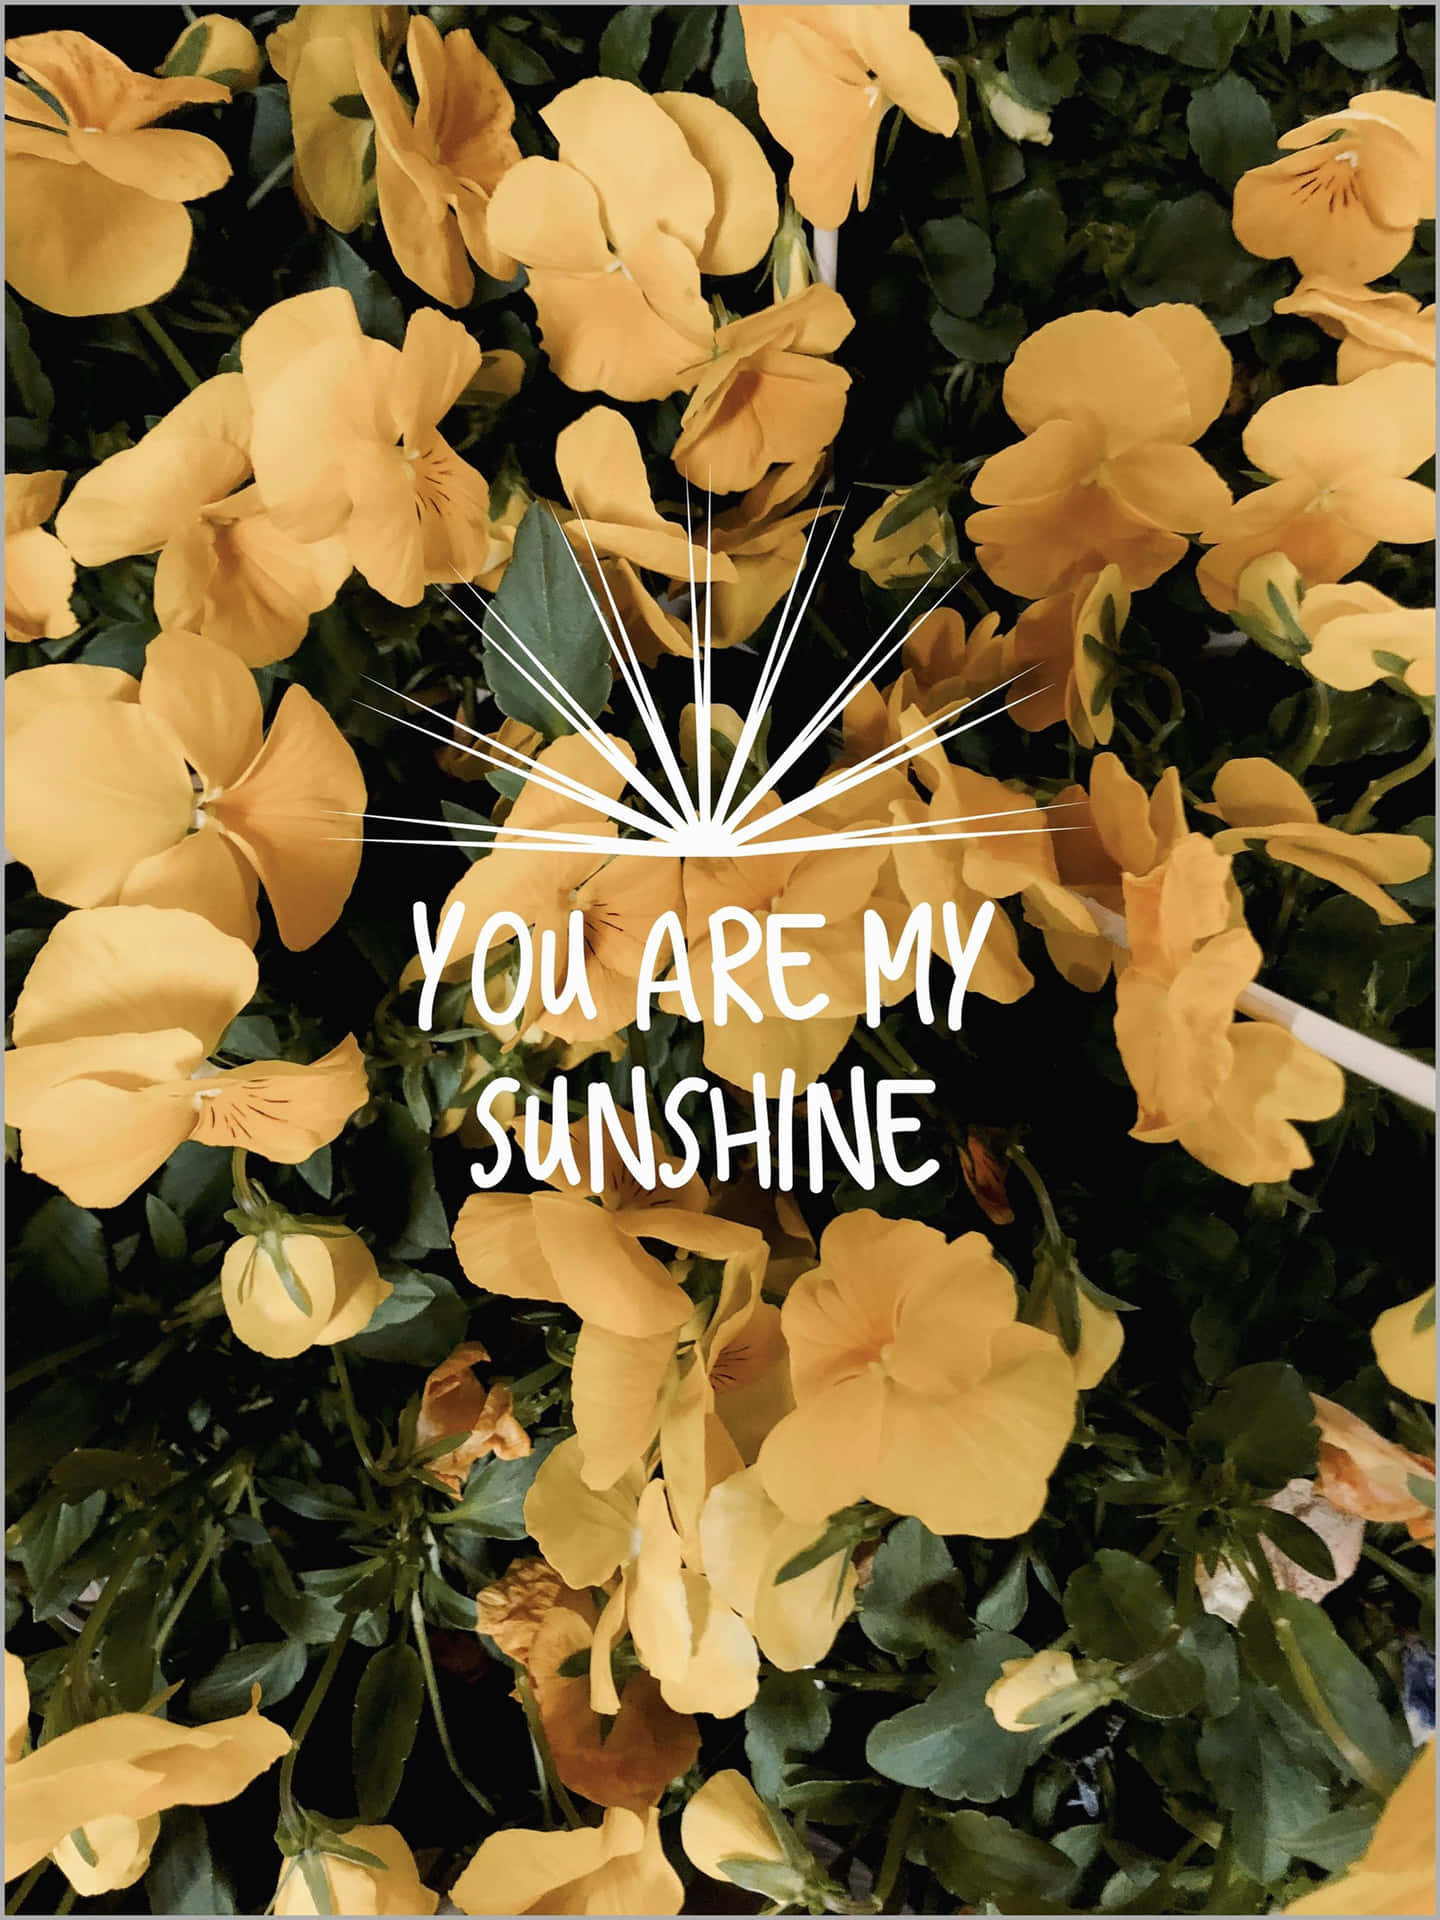 You Are My Sunshine - A Yellow Flower With The Words You Are My Sunshine